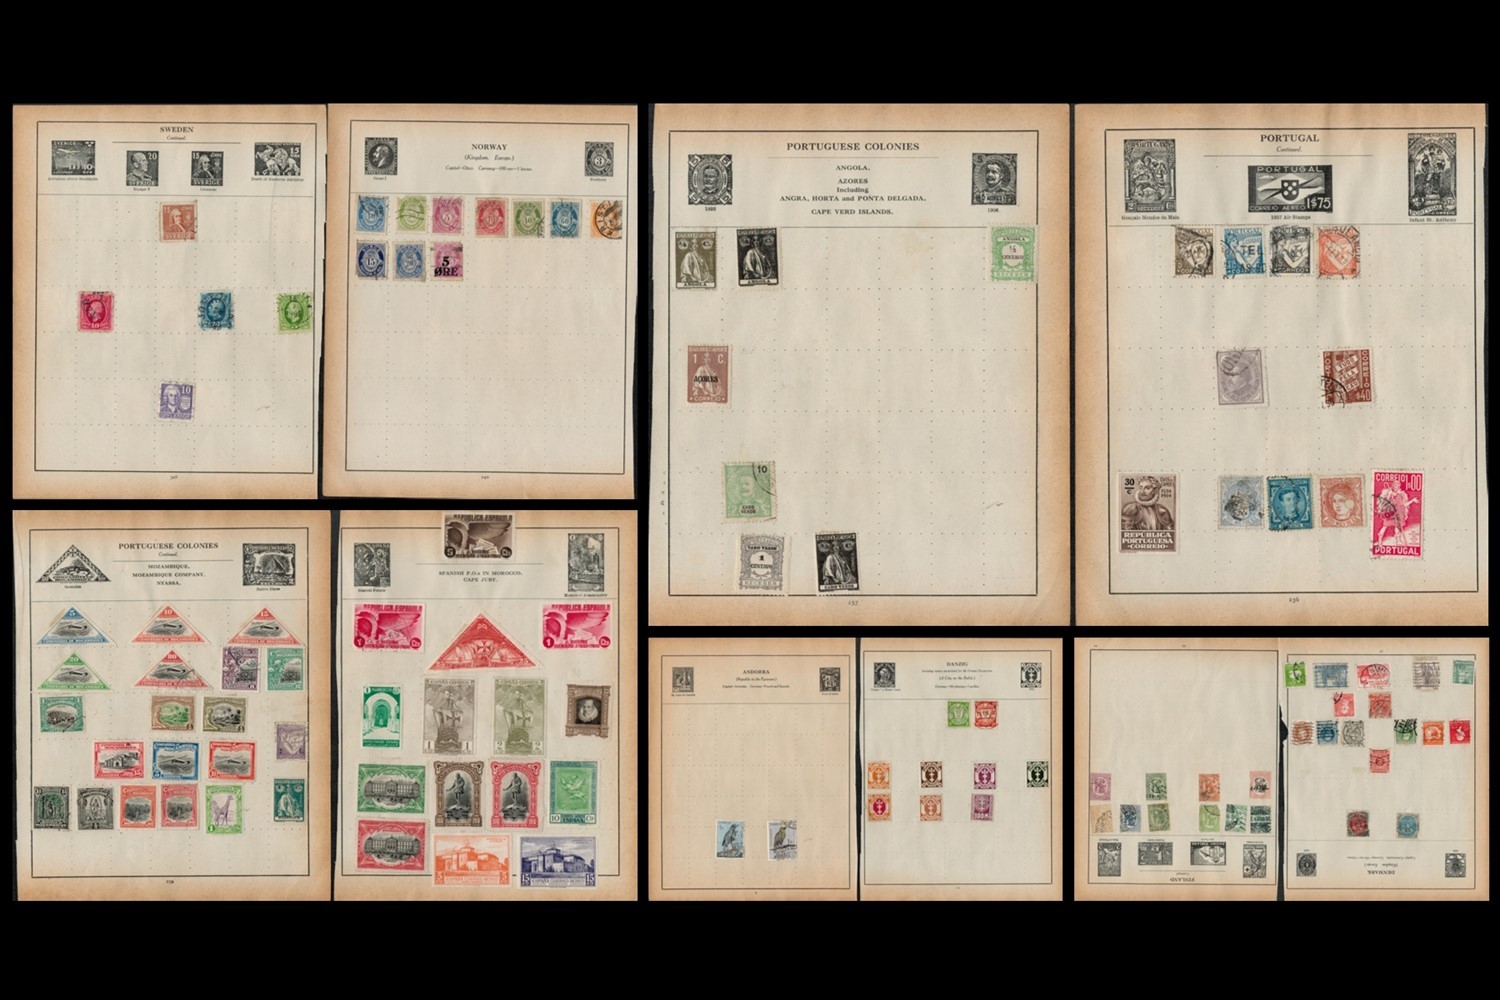 20 Stamp pages of Europe and Scandinavia. Such as Spain, Portugal and Colonies, Sweden, Norway,